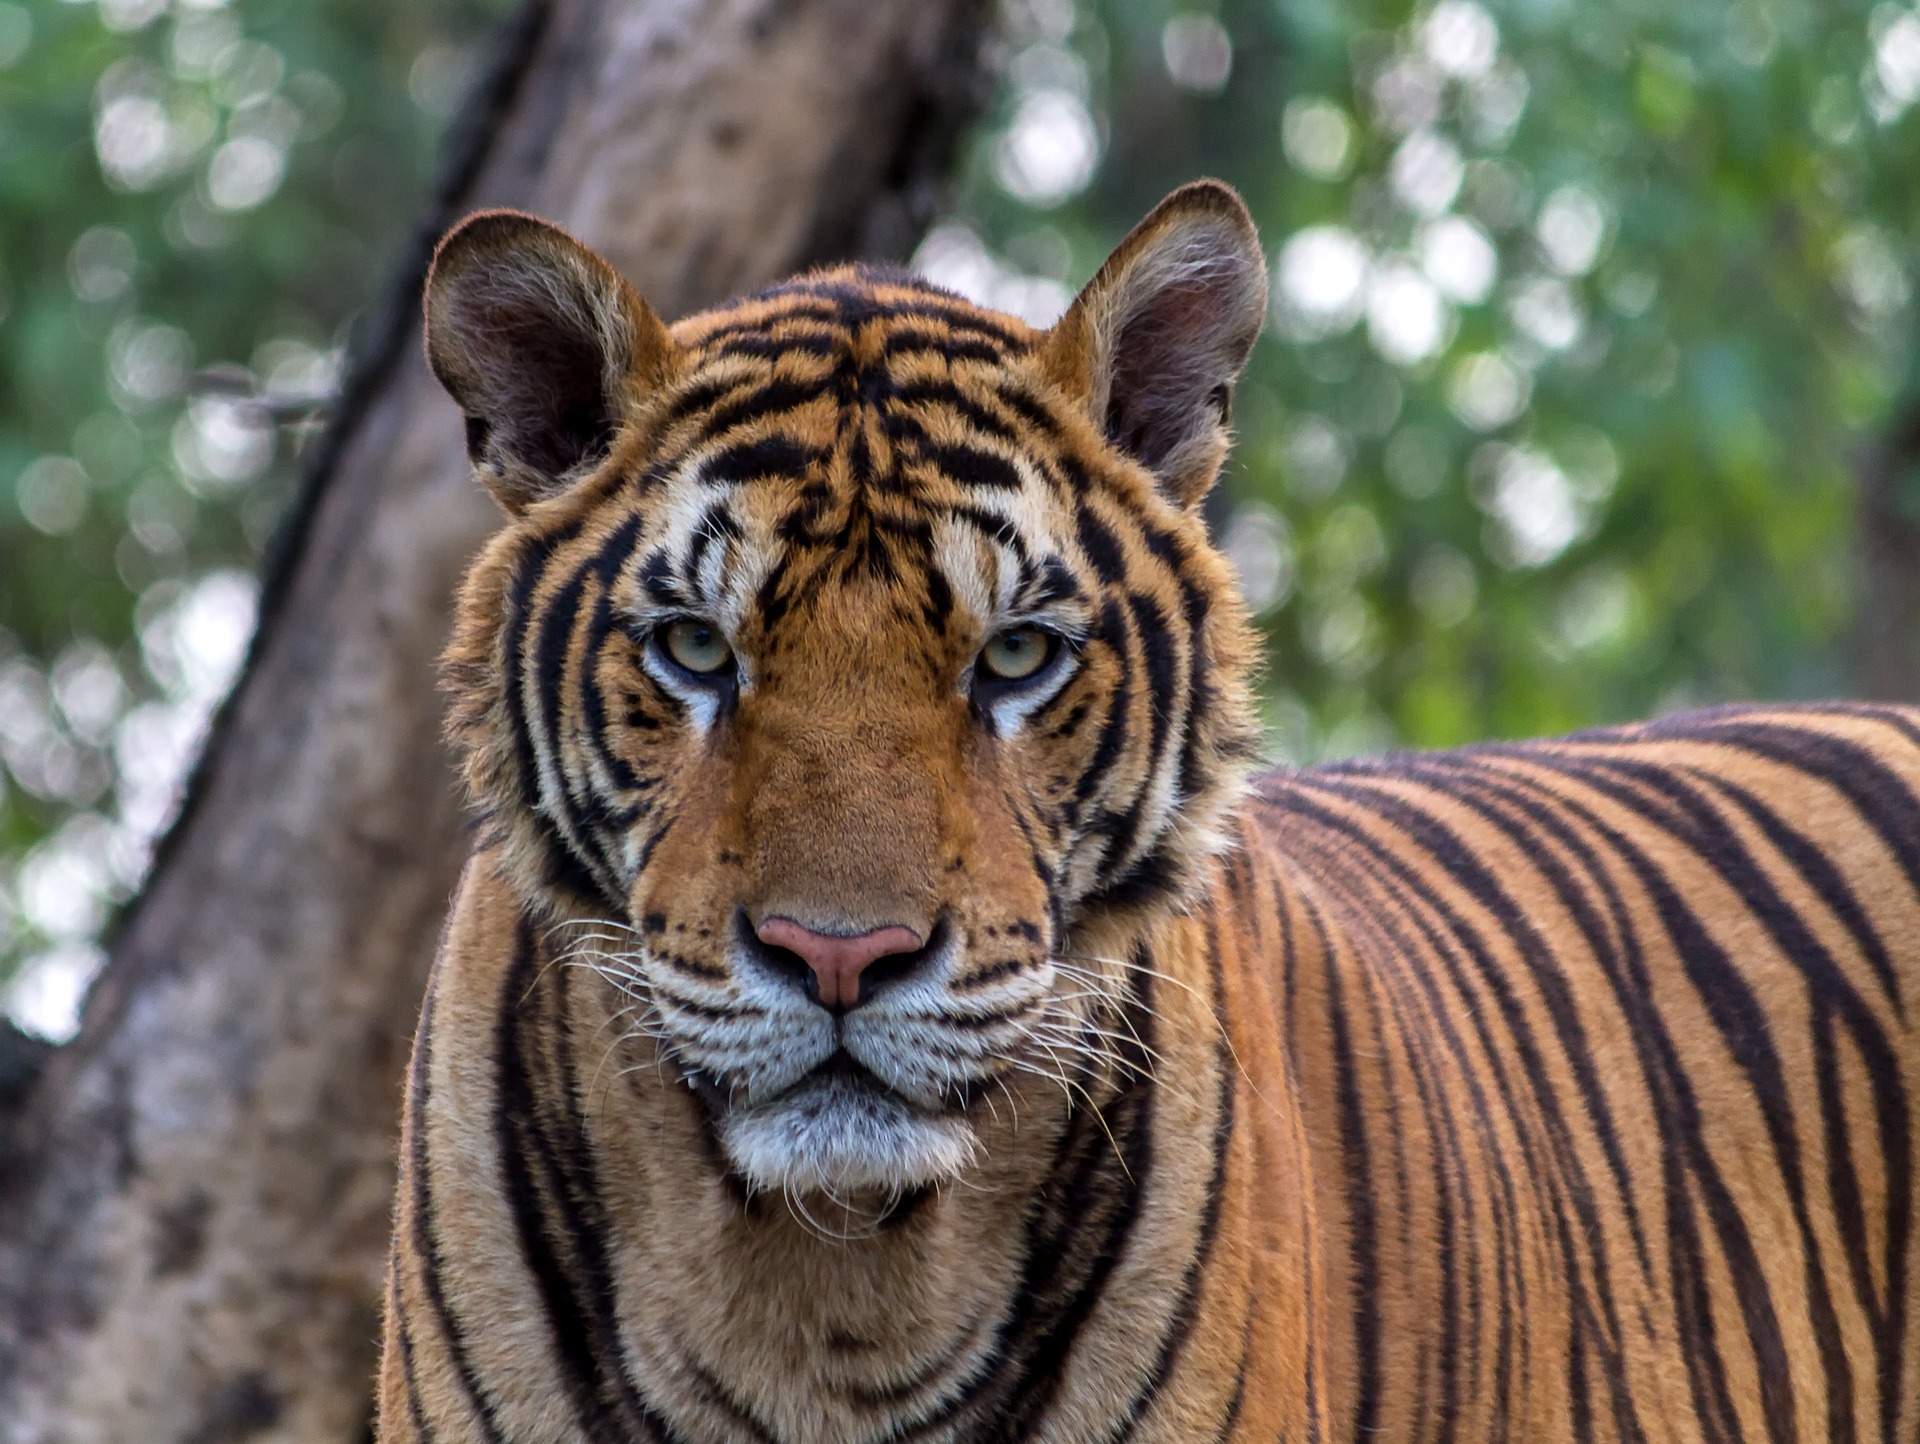 See tigers and more on your list of Fort Morgan tourist destinations